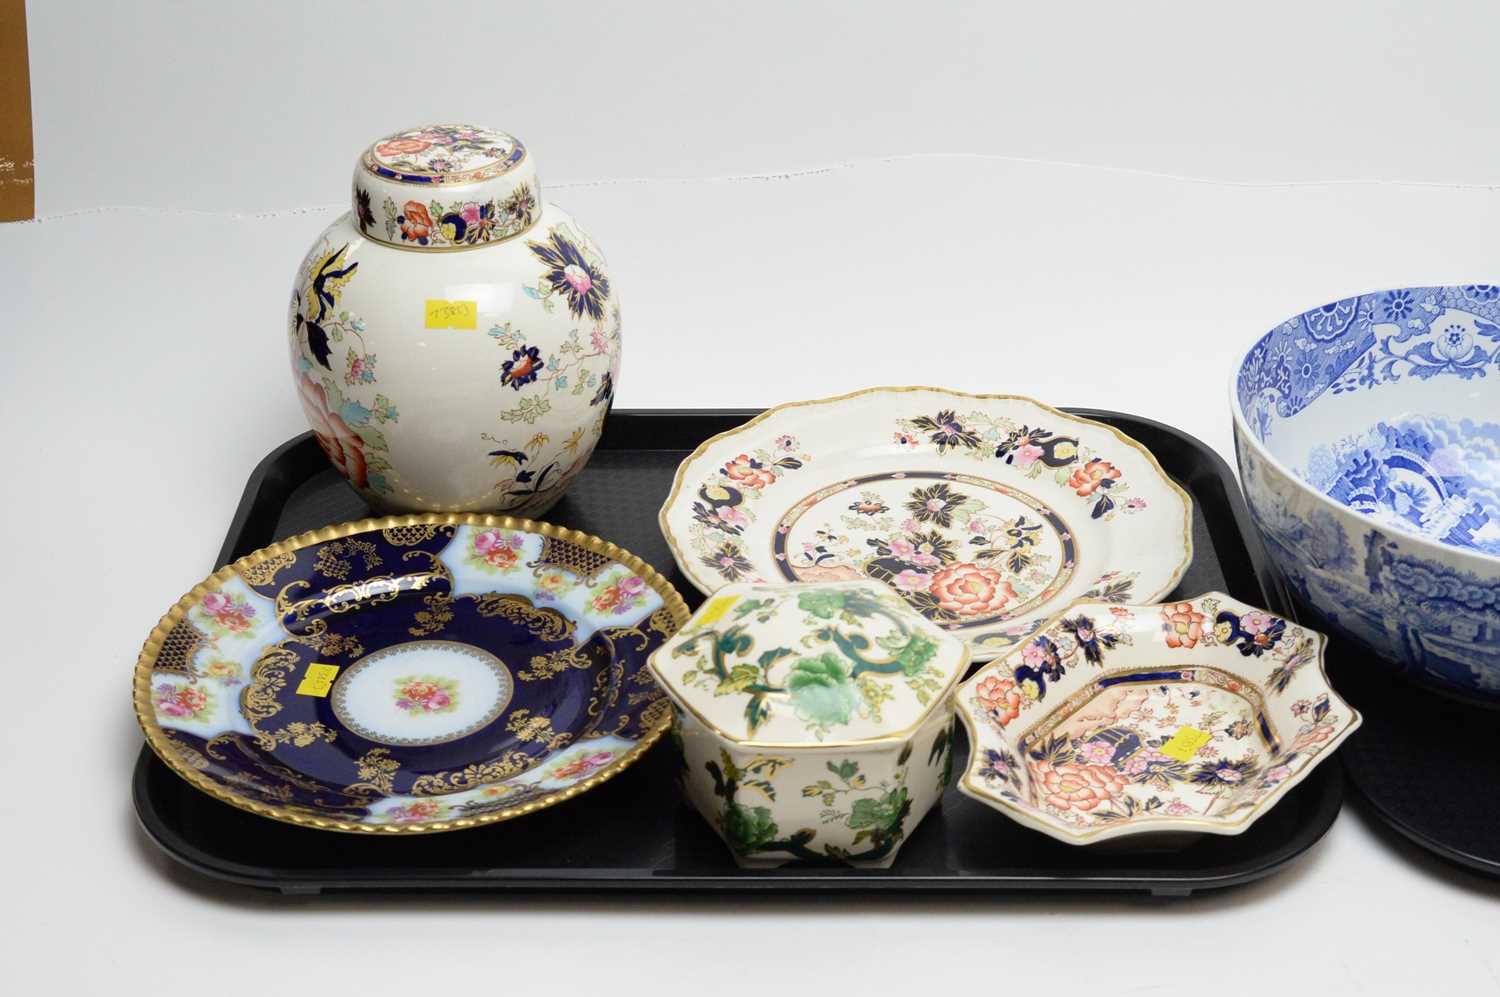 A selection of British decorative ceramic wares. - Image 3 of 3